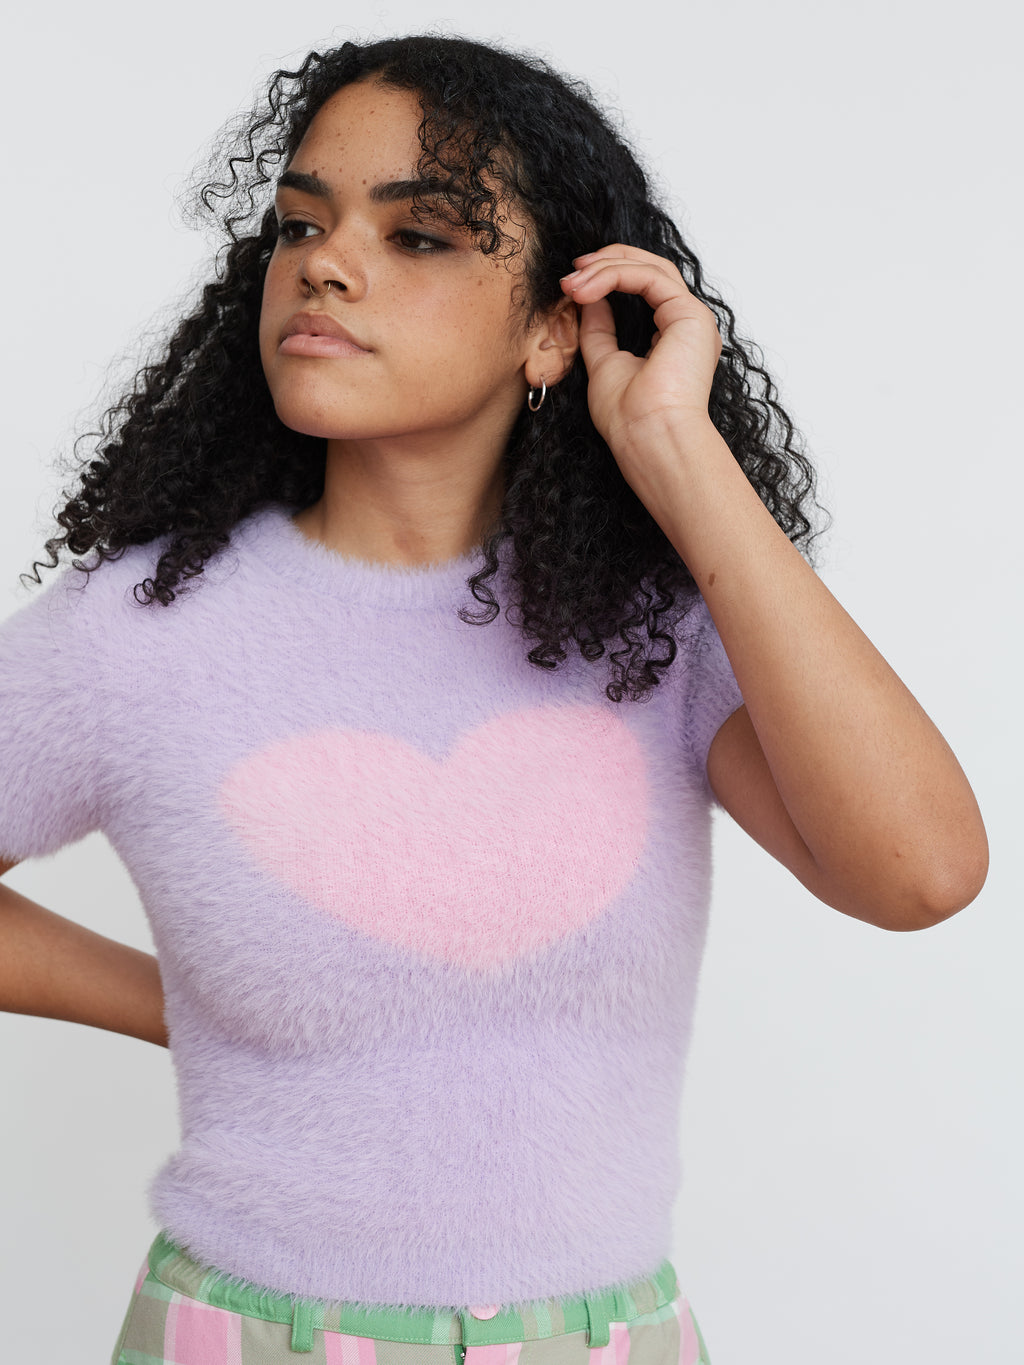 Heavy Heart Knitted Top